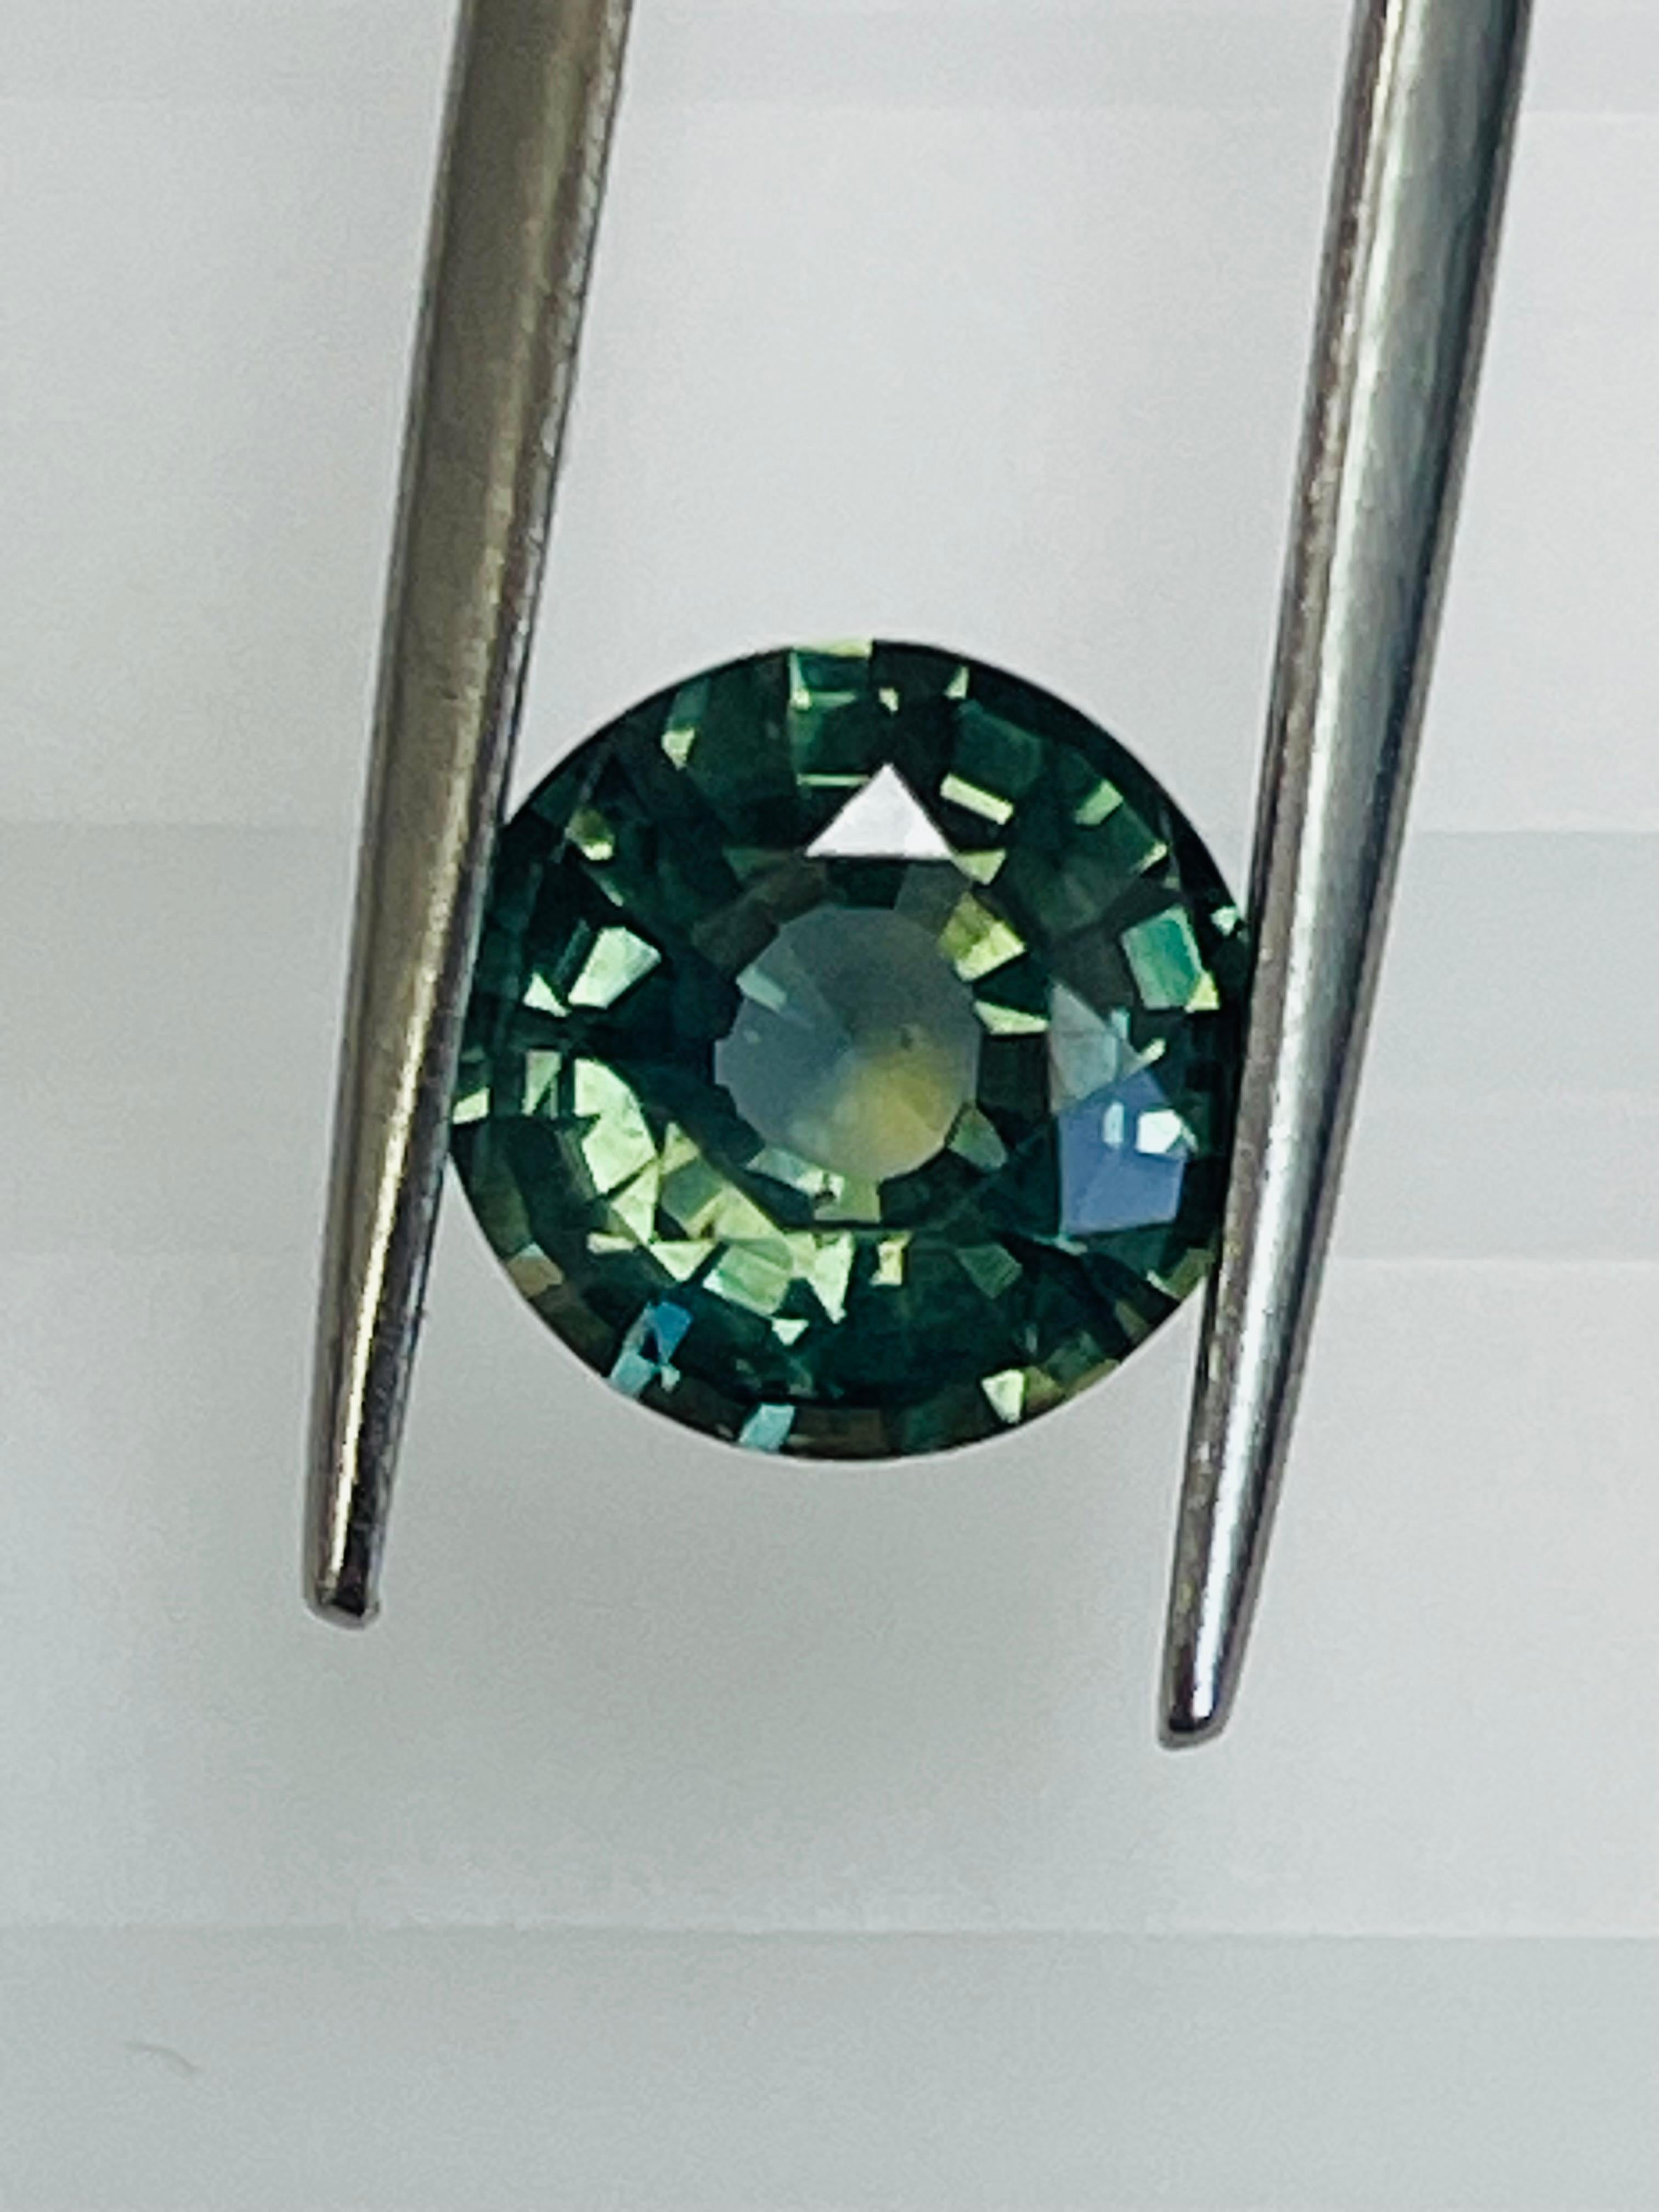 This 2.52 Ct Round Green Sapphire is one of the very beautiful varieties of colors in sapphires that is Also Natural No heat .
This stone is beautifully cut and has great color and clarity that adds to its beauty and size which makes it very